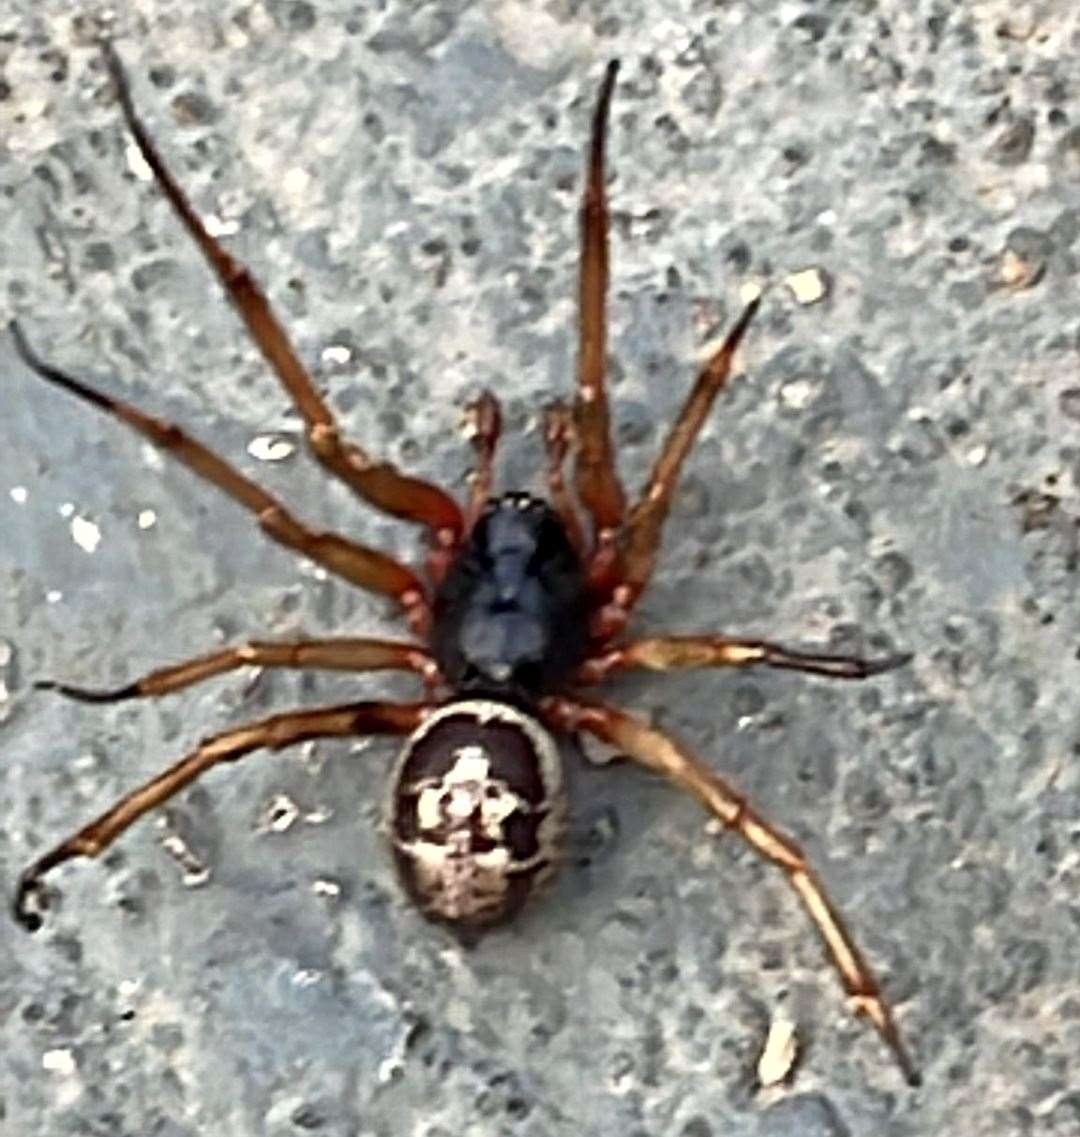 A picture Mr Missey got of what he believes was a noble false widow in his garden. Picture: Jason Missey/Pen News